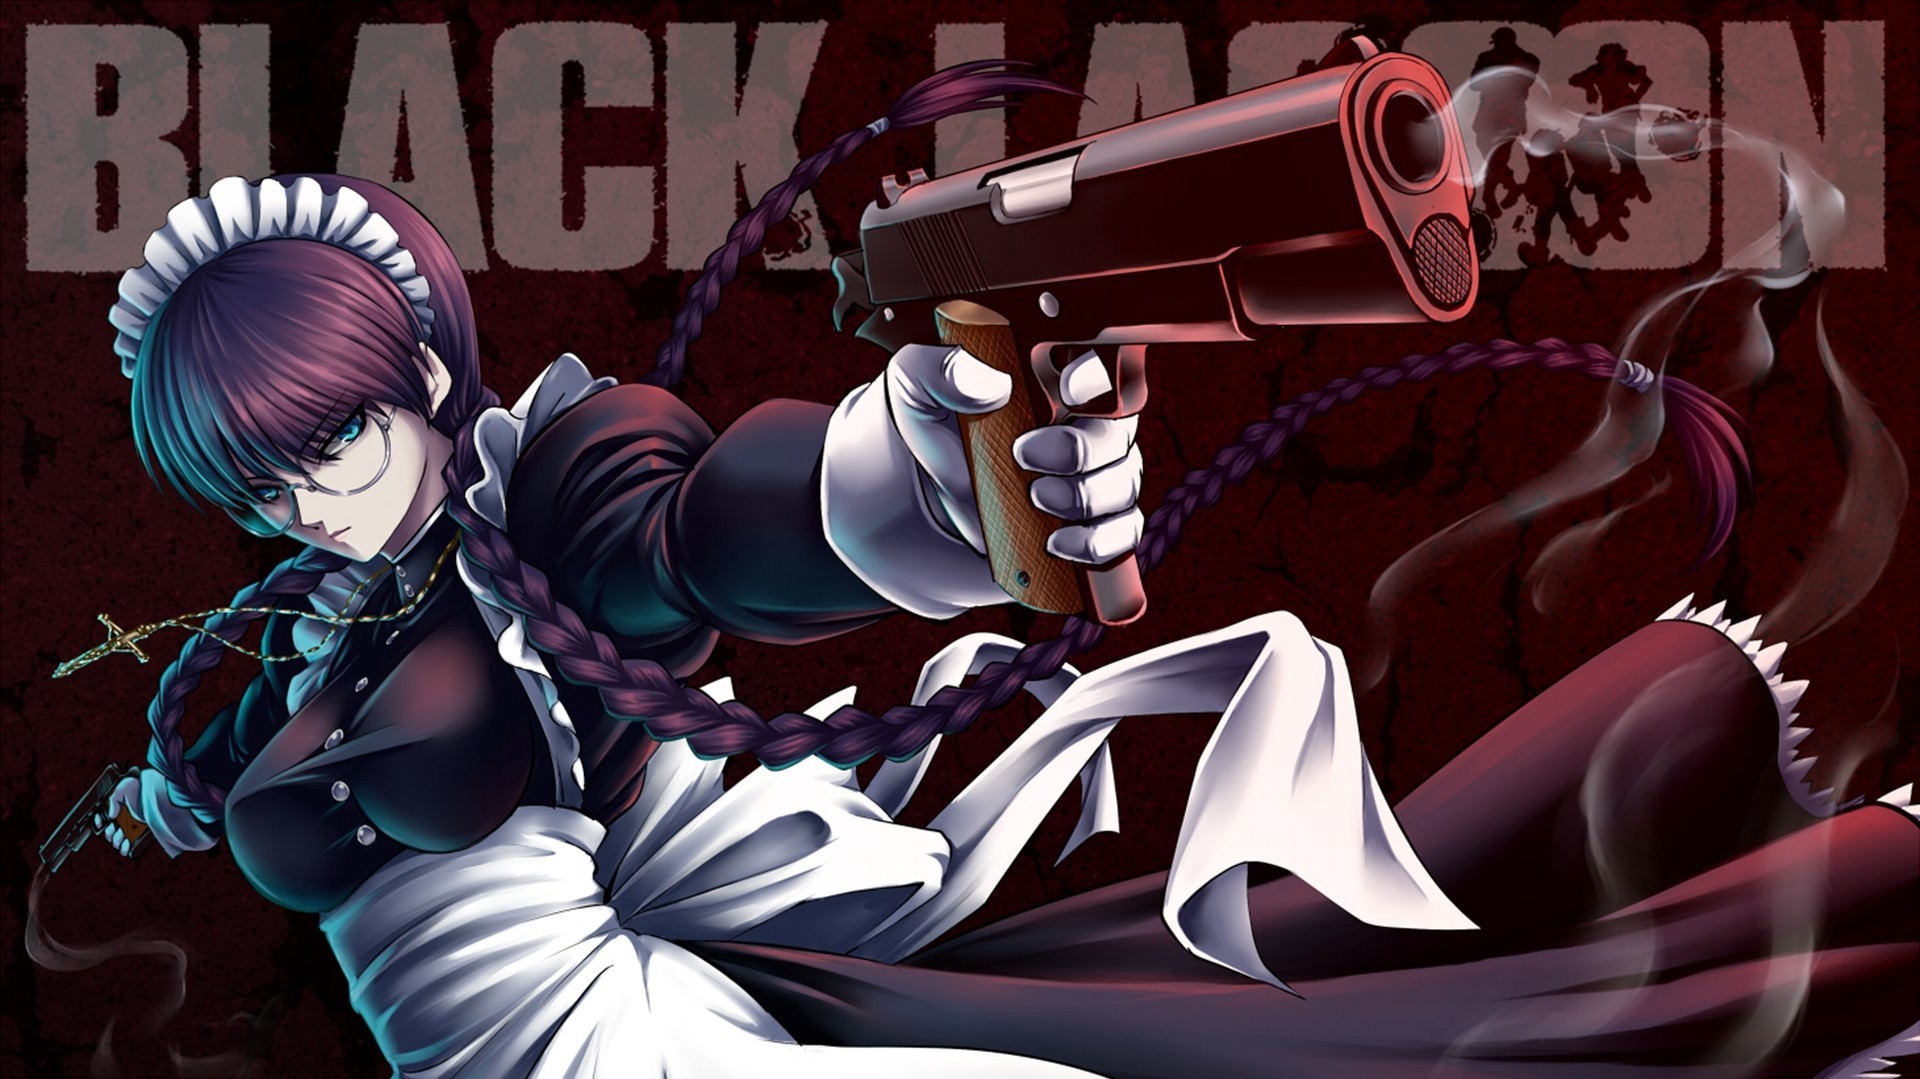 Anime 1920x1079 Black Lagoon gun anime girls Roberta girls with guns boobs big boobs weapon angry face purple hair aqua eyes necklace cross braids twintails maid maid outfit glasses smoke gloves looking at viewer